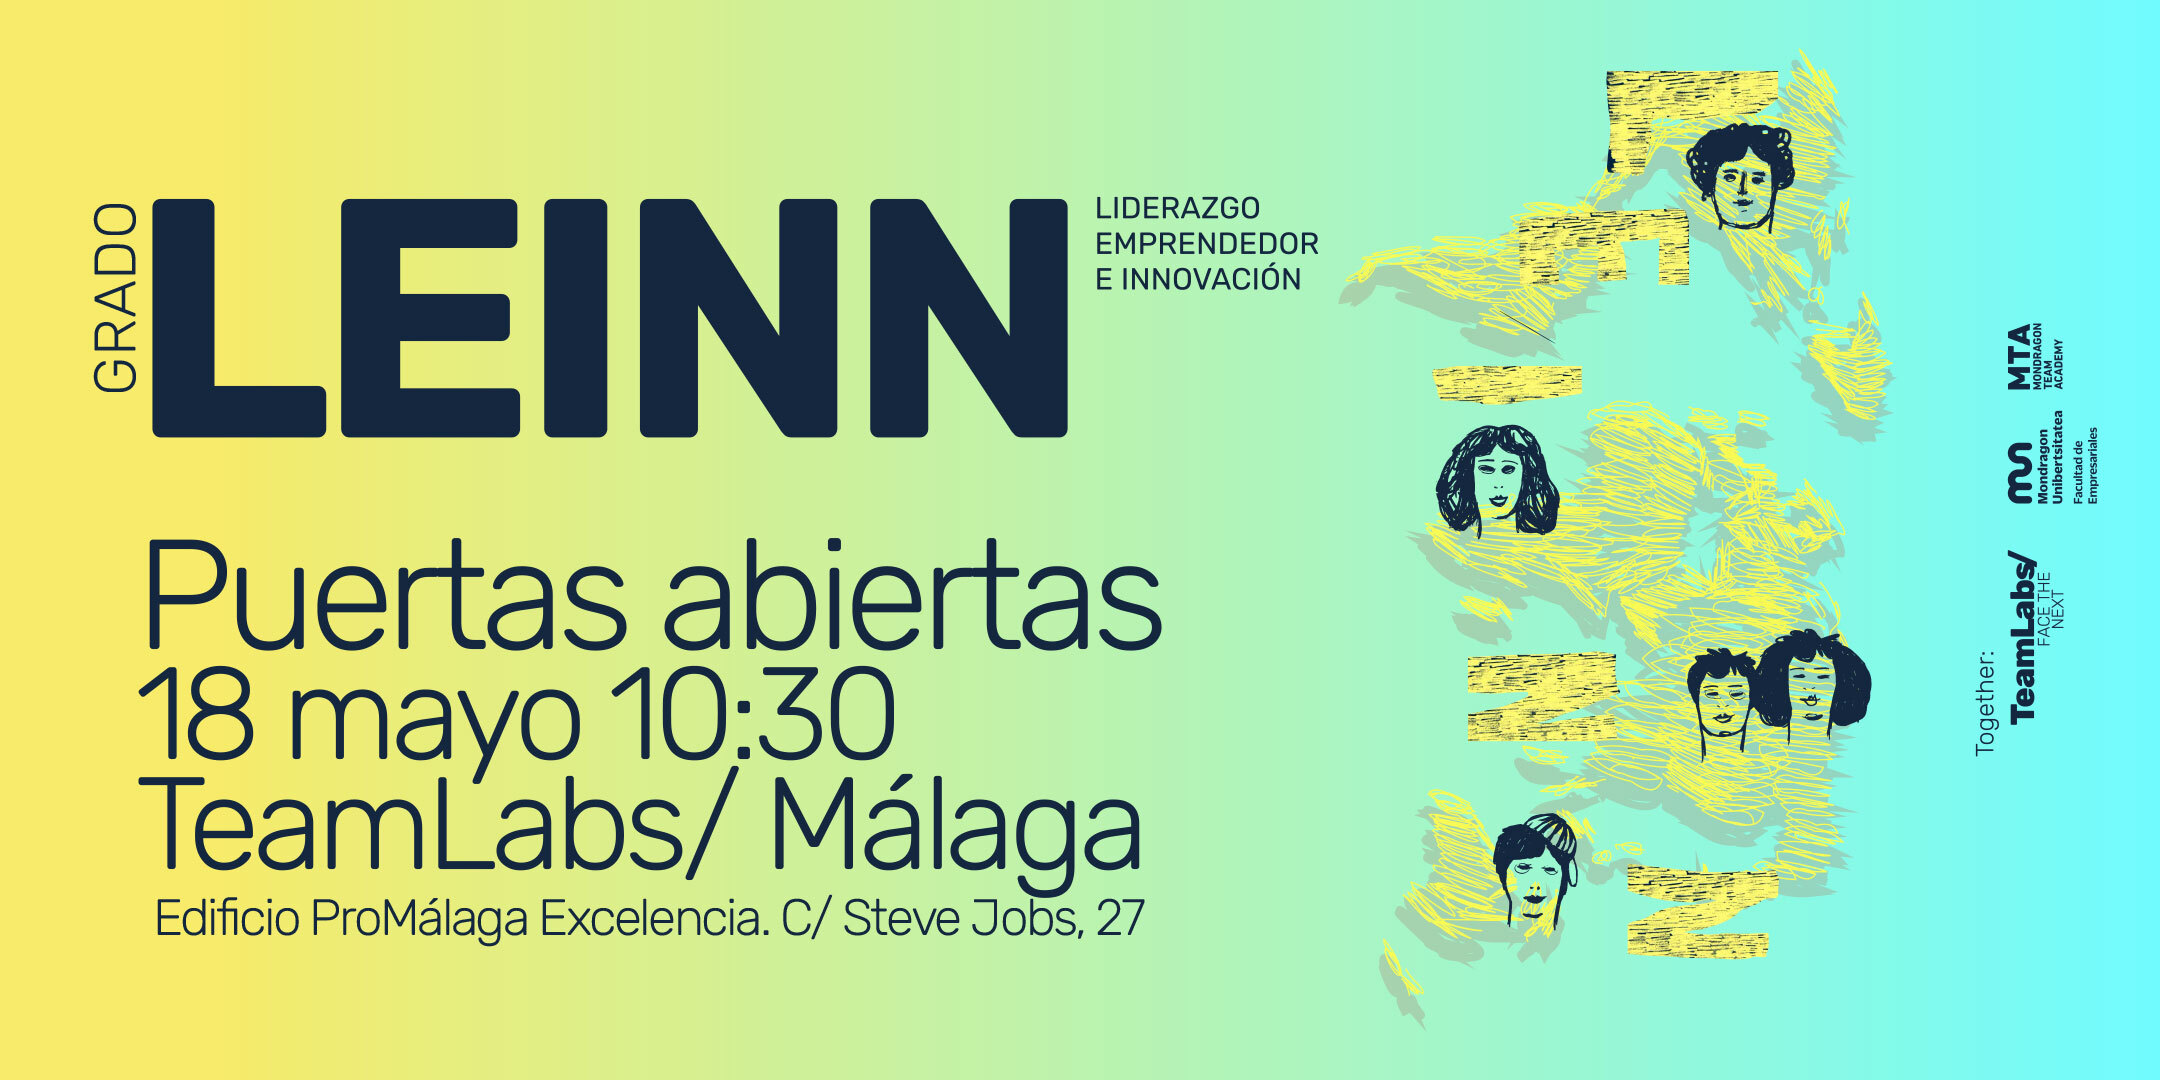 Open day to learn about the LEINN degree (Entrepreneurial Leadership and Innovation) from the University of Mondragón